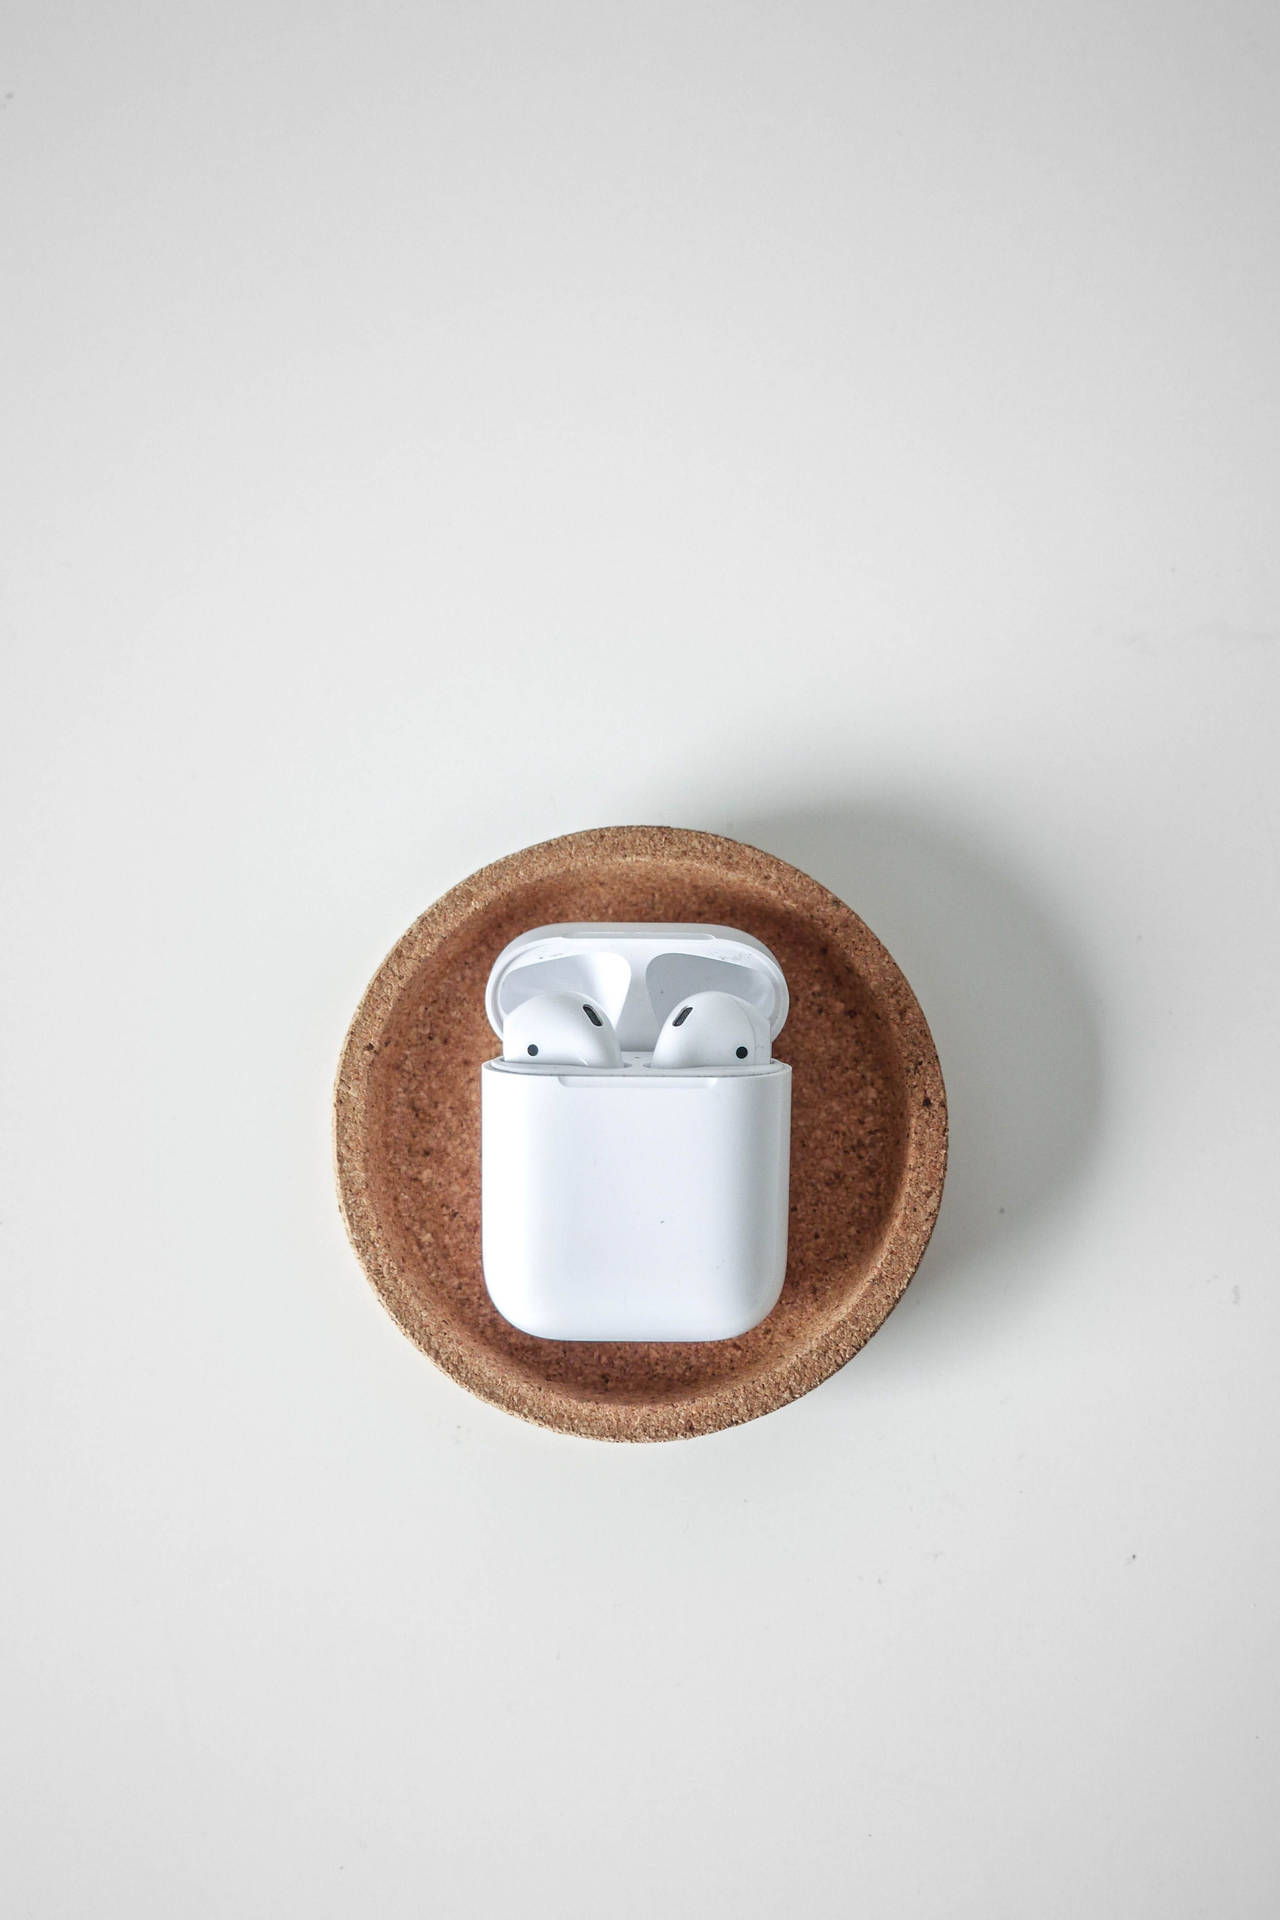 White Apple Airpods Background